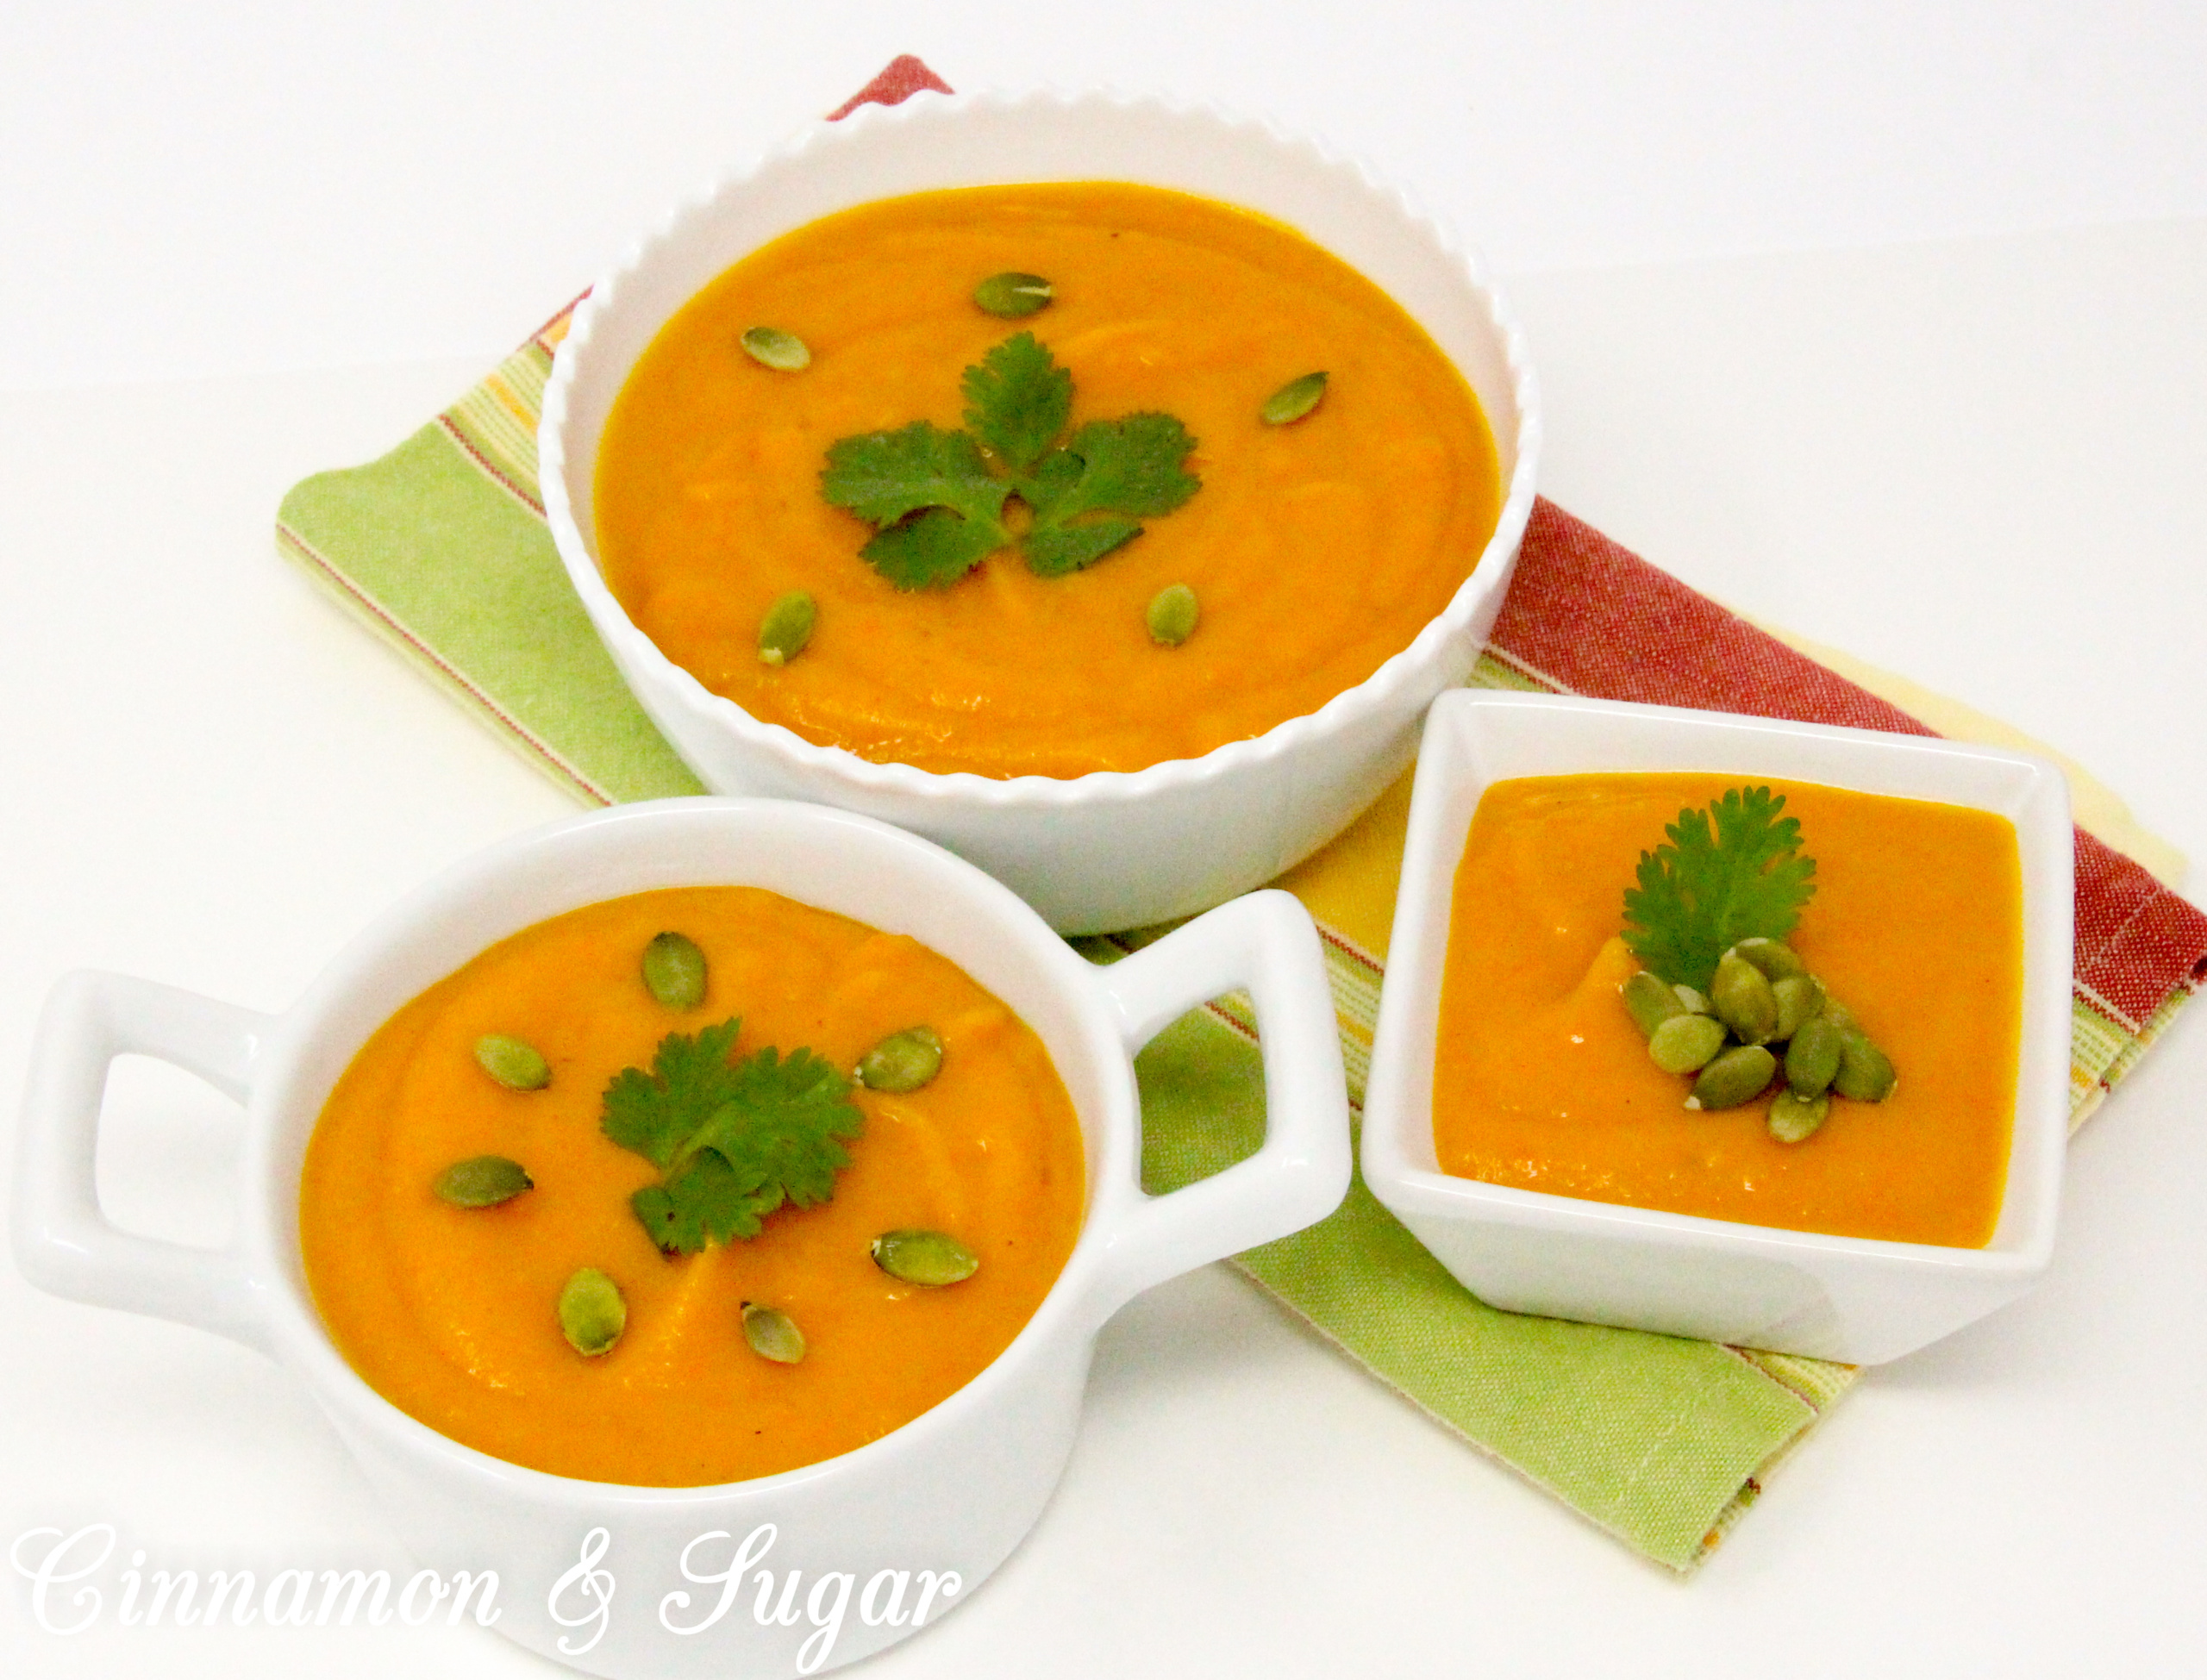 Combining warming spices and the rich-colored hue of sweet potatoes, Curried Sweet Potato Soup is a comforting and nourishing dish. Recipe shared with permission granted by Maureen Klovers, author of OF MASQUES AND MURDER.